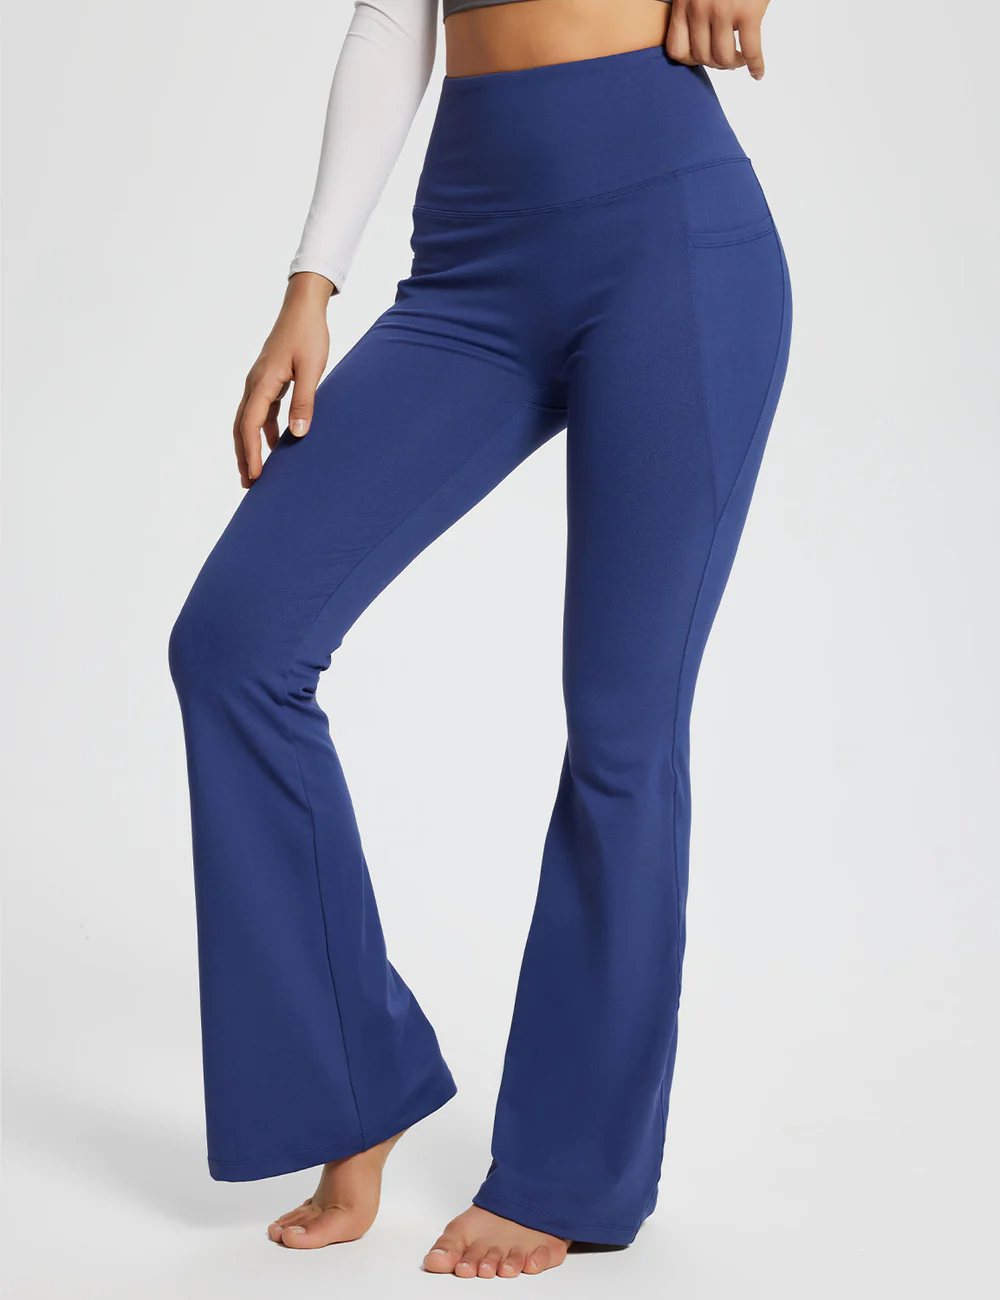 The Best Flared Pants for Your Body Type and Personality – Baleaf Sports